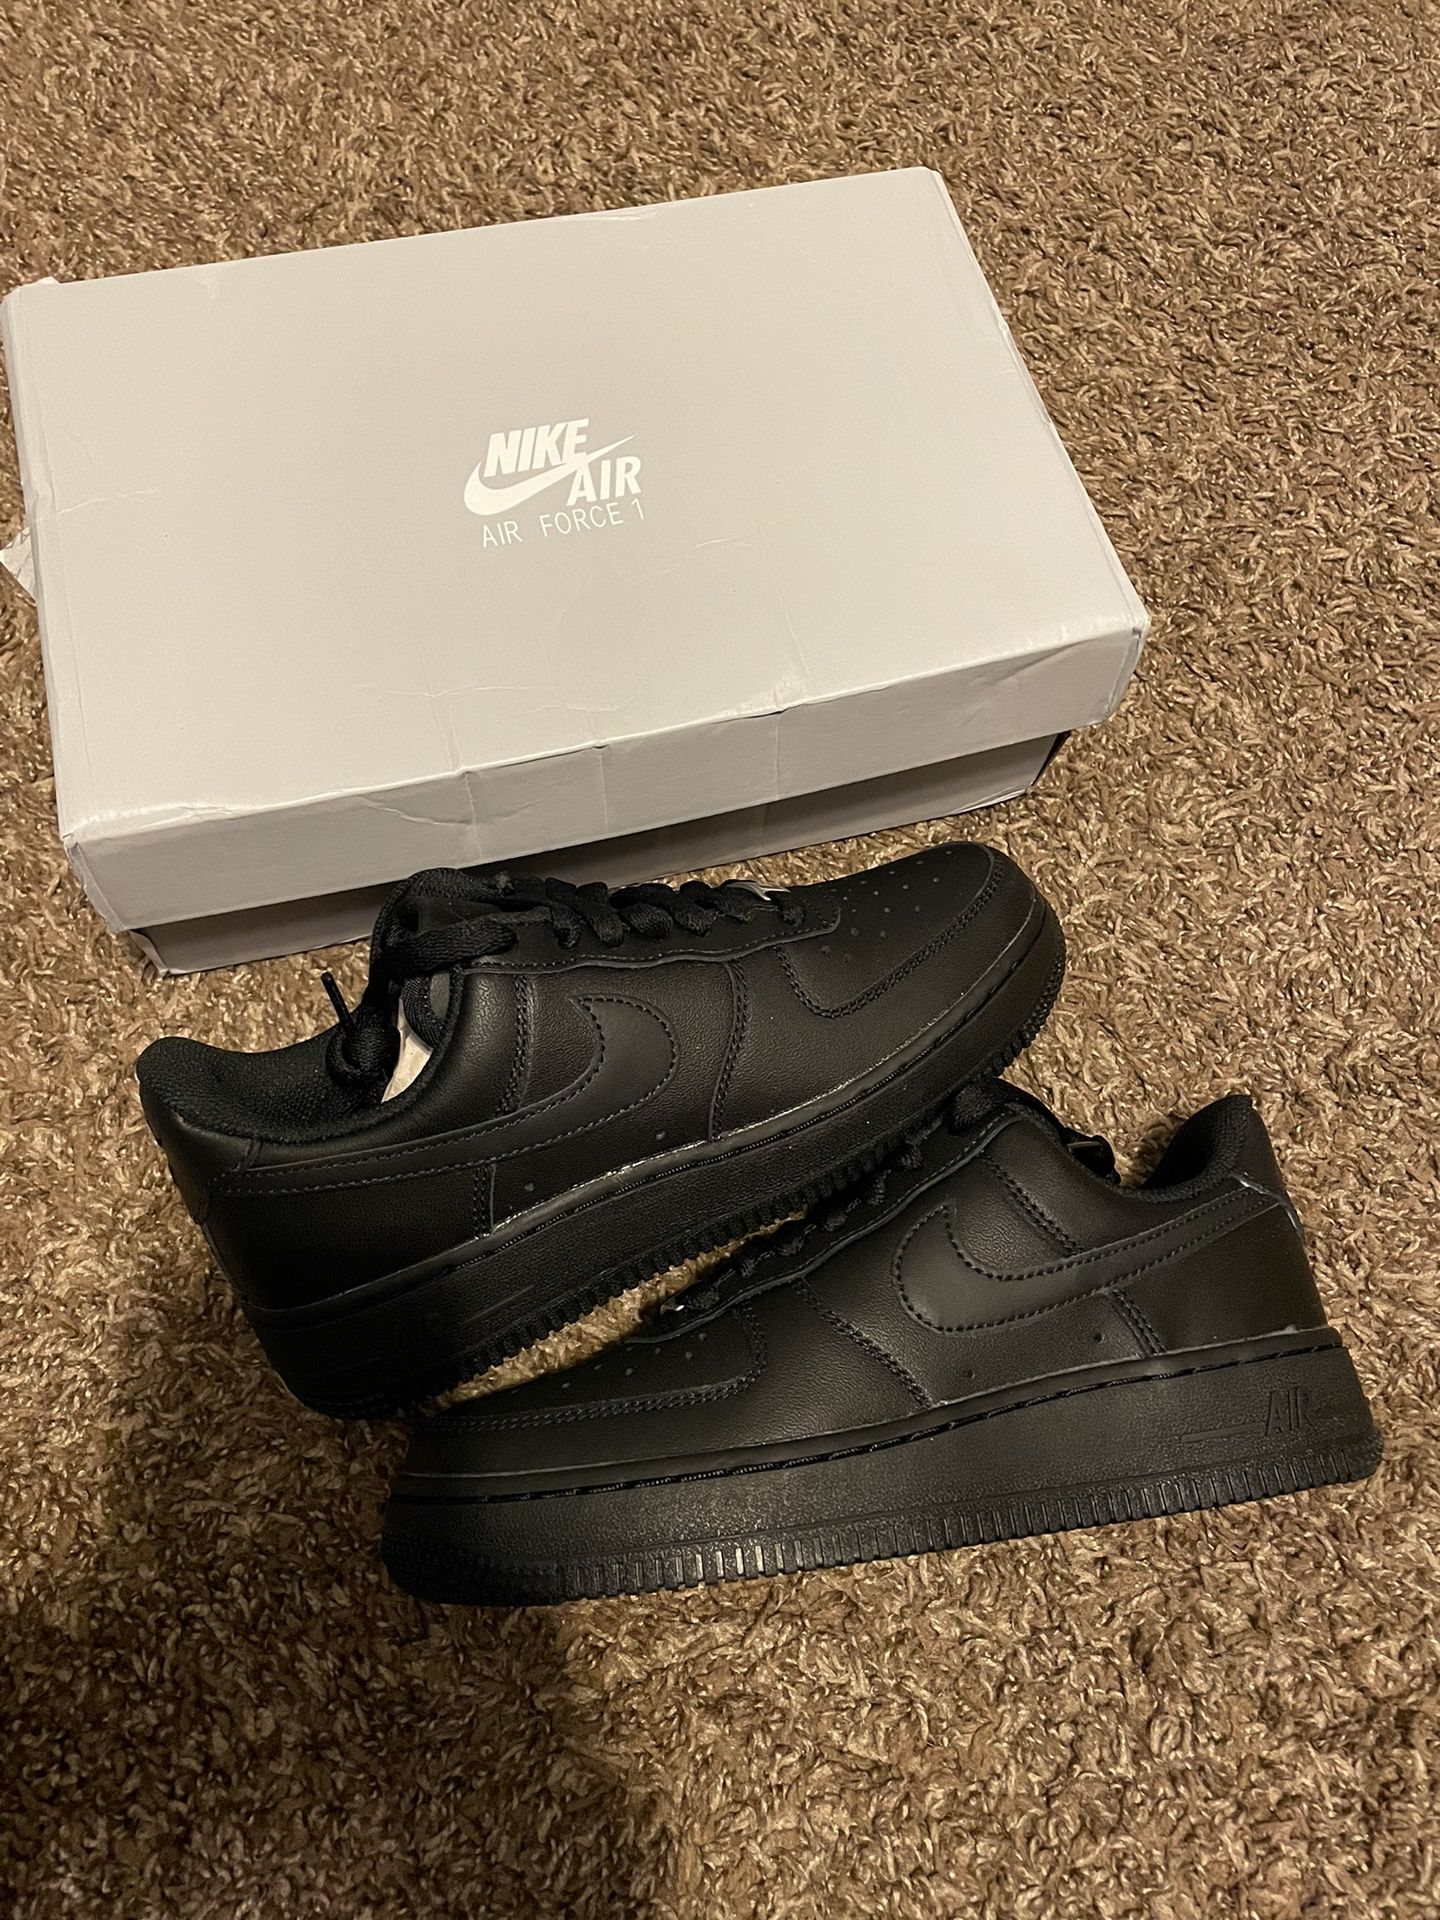 Nike Air Force 1 Black WMNS Size 5.5 And 6 for Sale in Parma, OH - OfferUp